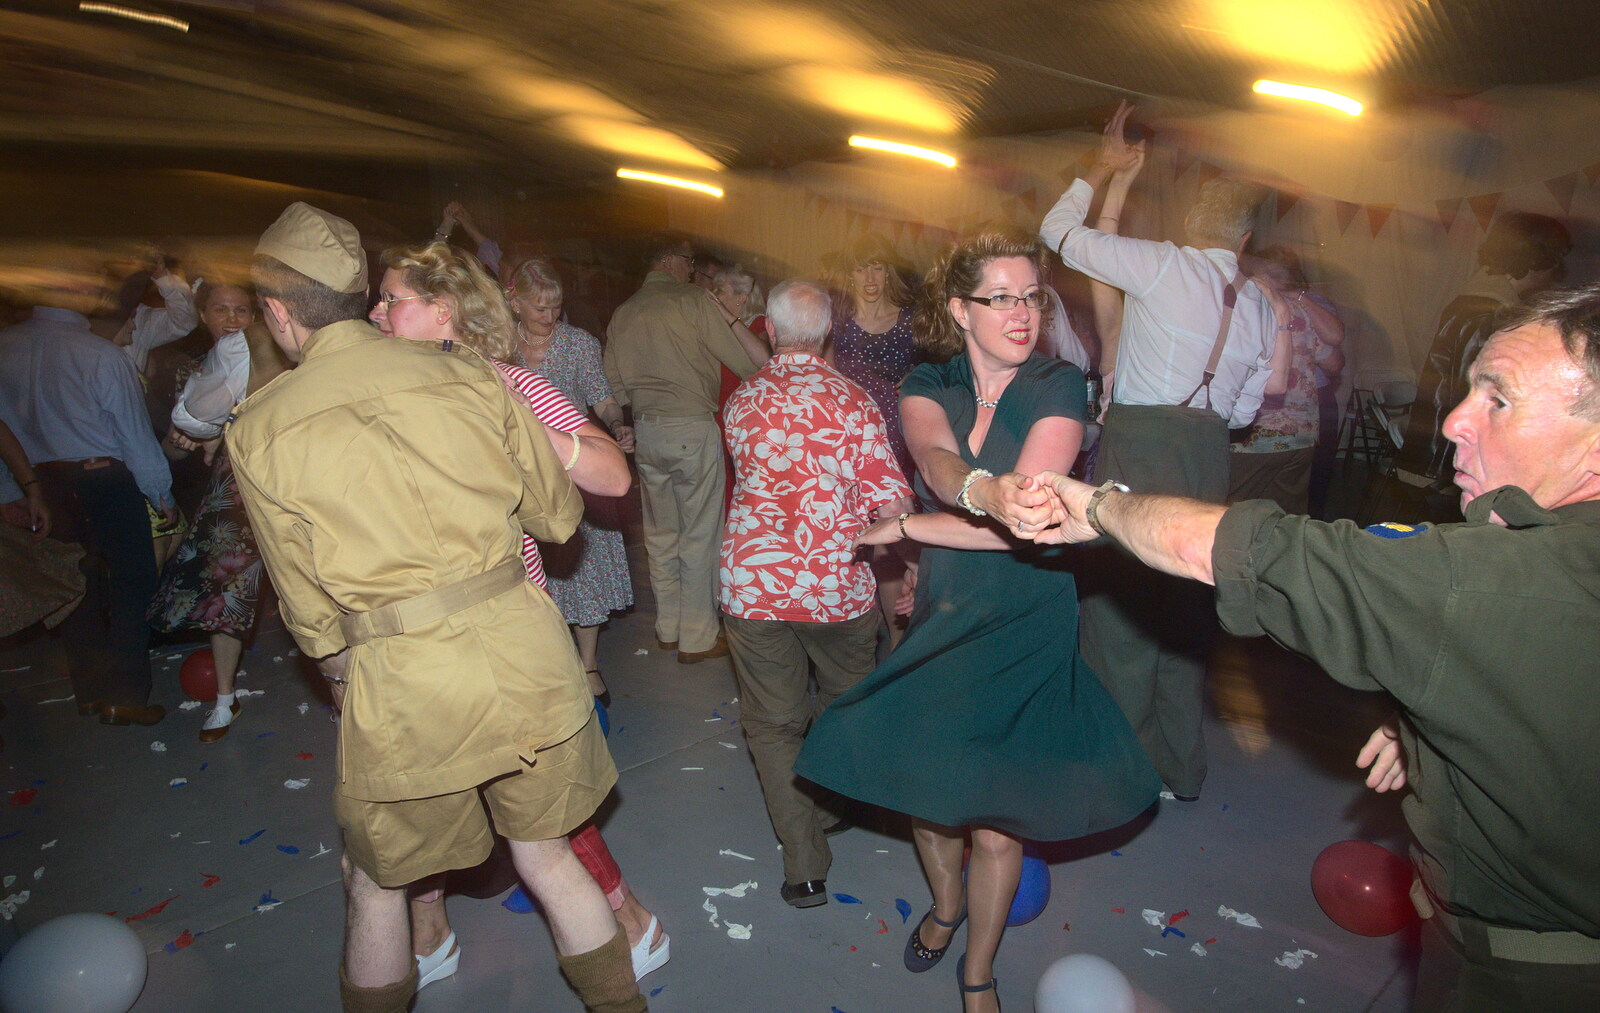 Suzanne does some crazy dancing from "Our Little Friends" Warbirds Hangar Dance, Hardwick, Norfolk - 9th July 2016